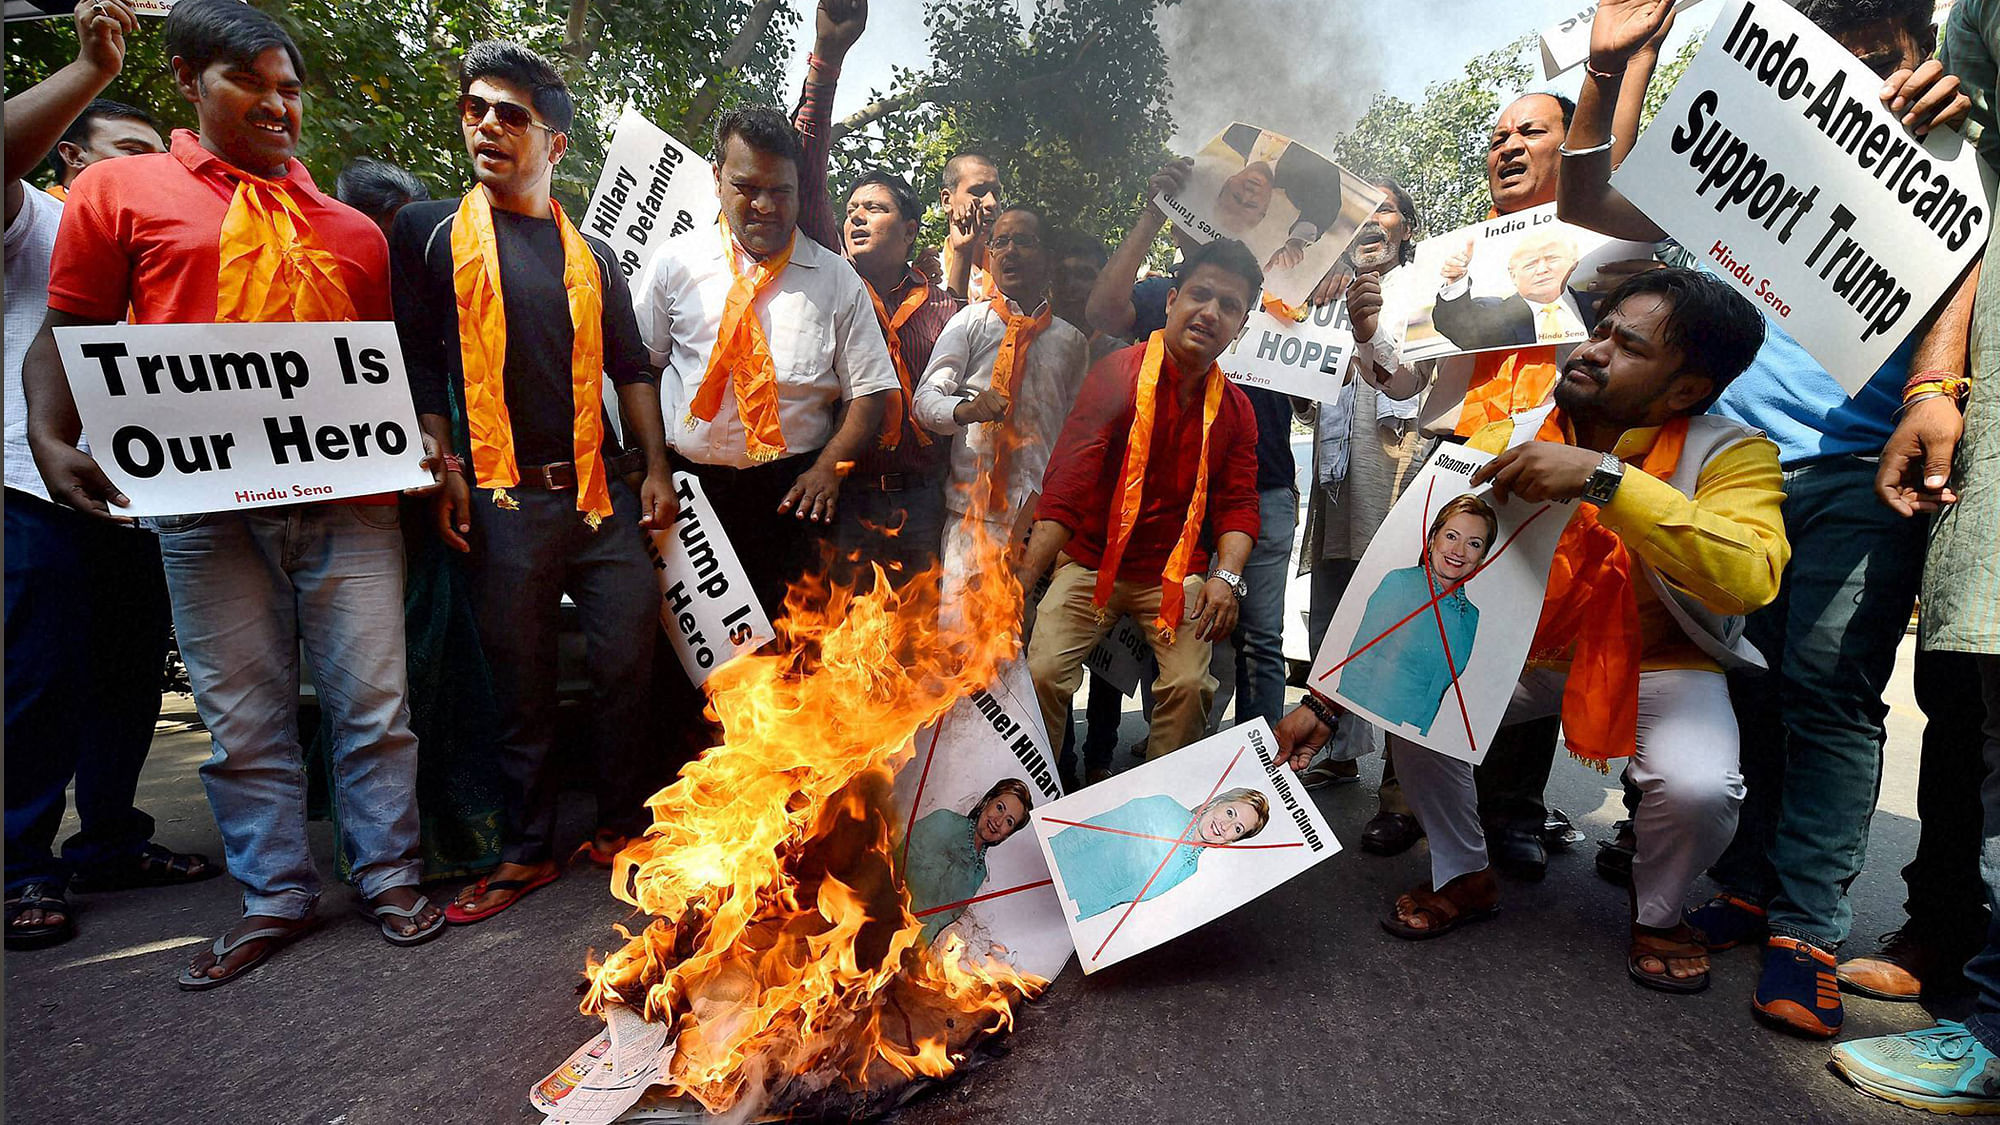 Activists of Hindu Sena set a portrait of U.S. presidential candidate Hillary Clinton on fire during a protest at Jantar Mantar in New Delhi on Tuesday. (Photo: PTI)